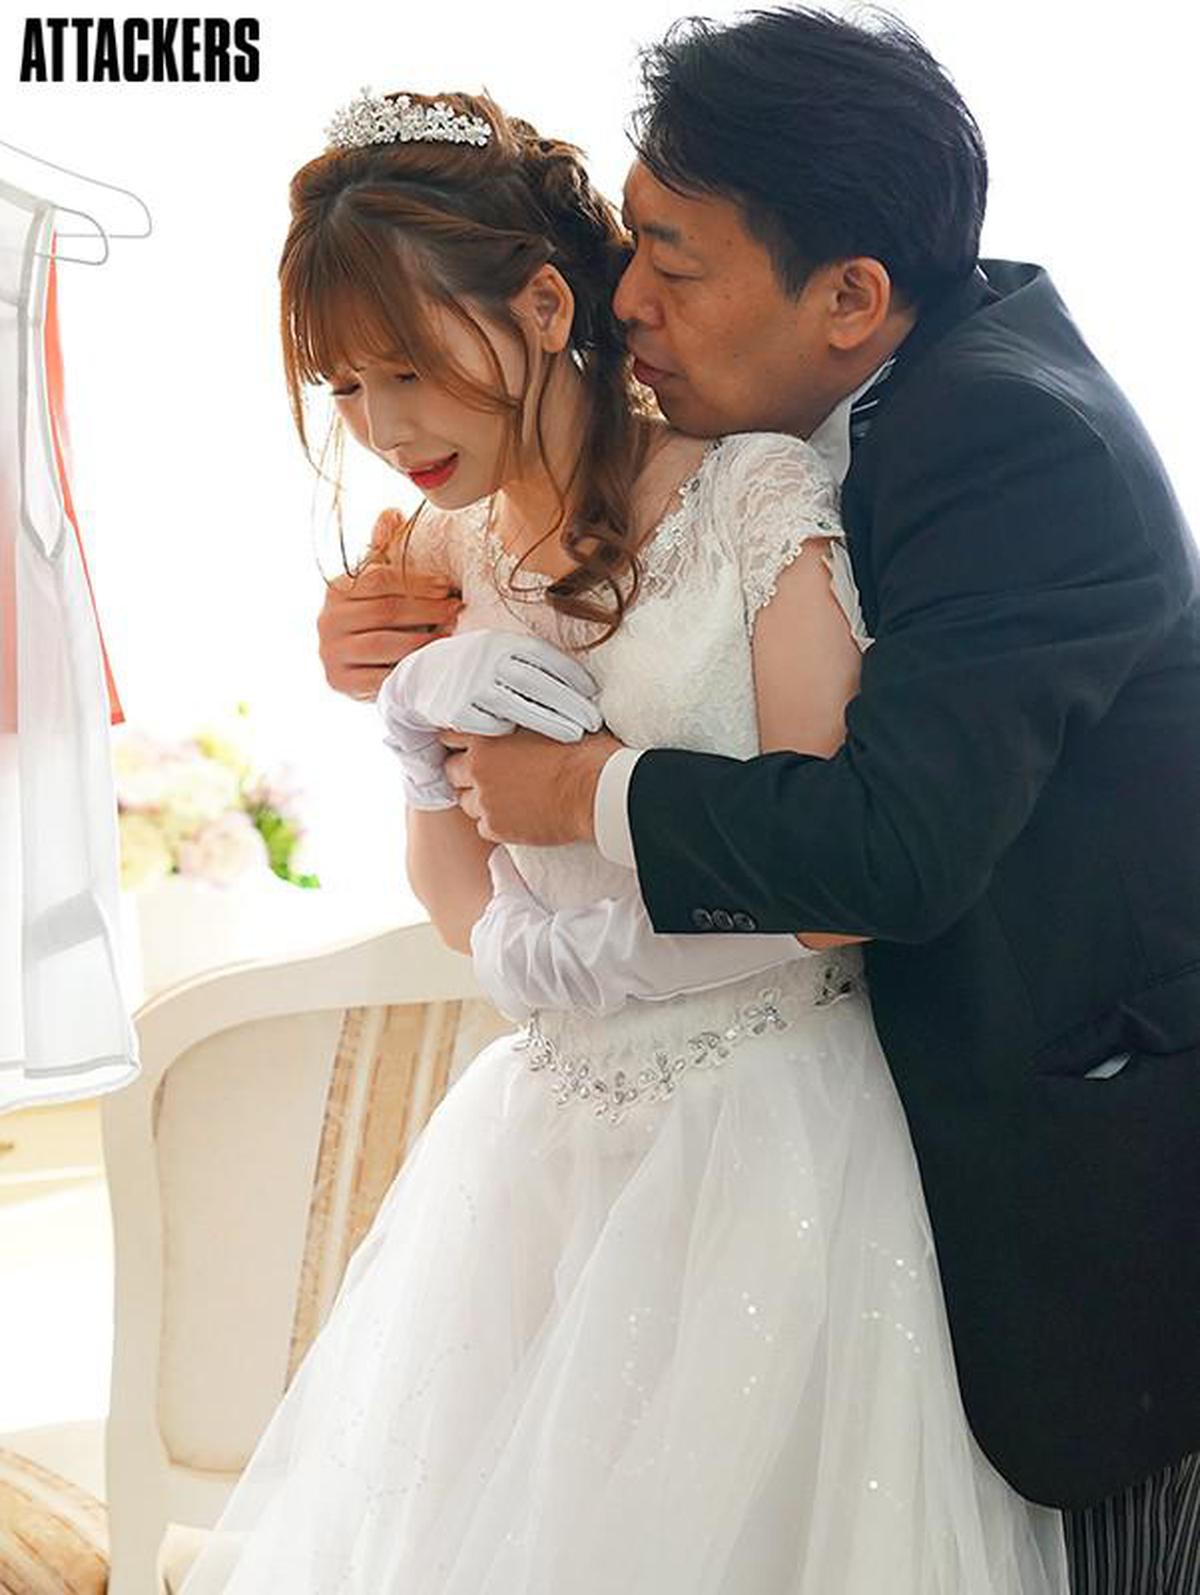 [ENGSUB]ADN-298 When The Wedding Ceremony Concluded, The Bride, In Her Moment Of Greatest Happiness, Got Fucked By Her Father-In-Law. This Dirty Old Man Subjected Her To A Full-Body-Licking Session Of Perverted Sex Tsumugi Akari